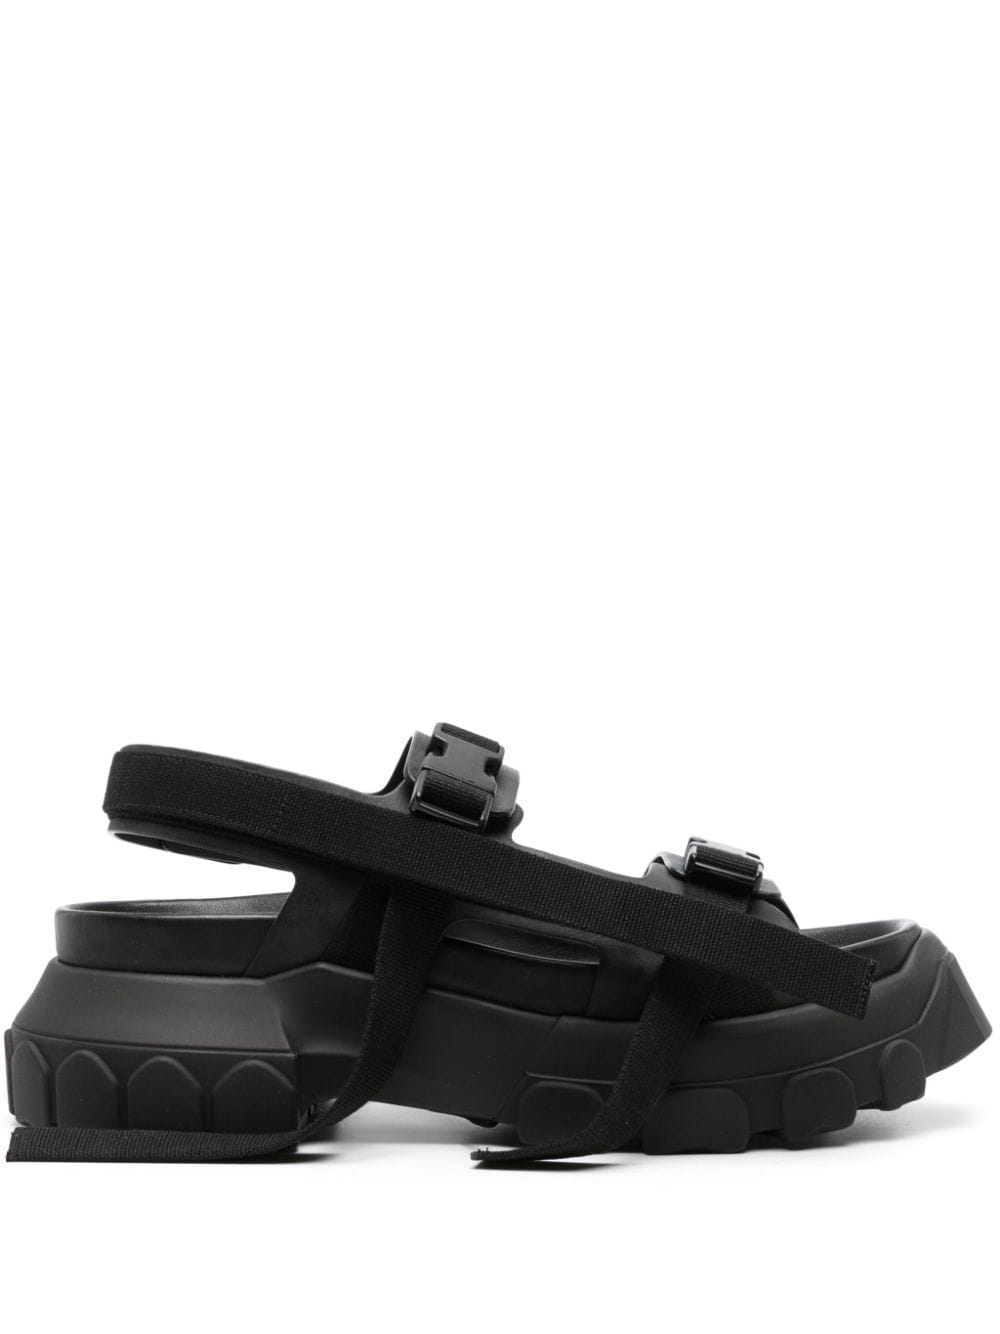 Rick Owens Tractor chunky leather sandals - Black von Rick Owens